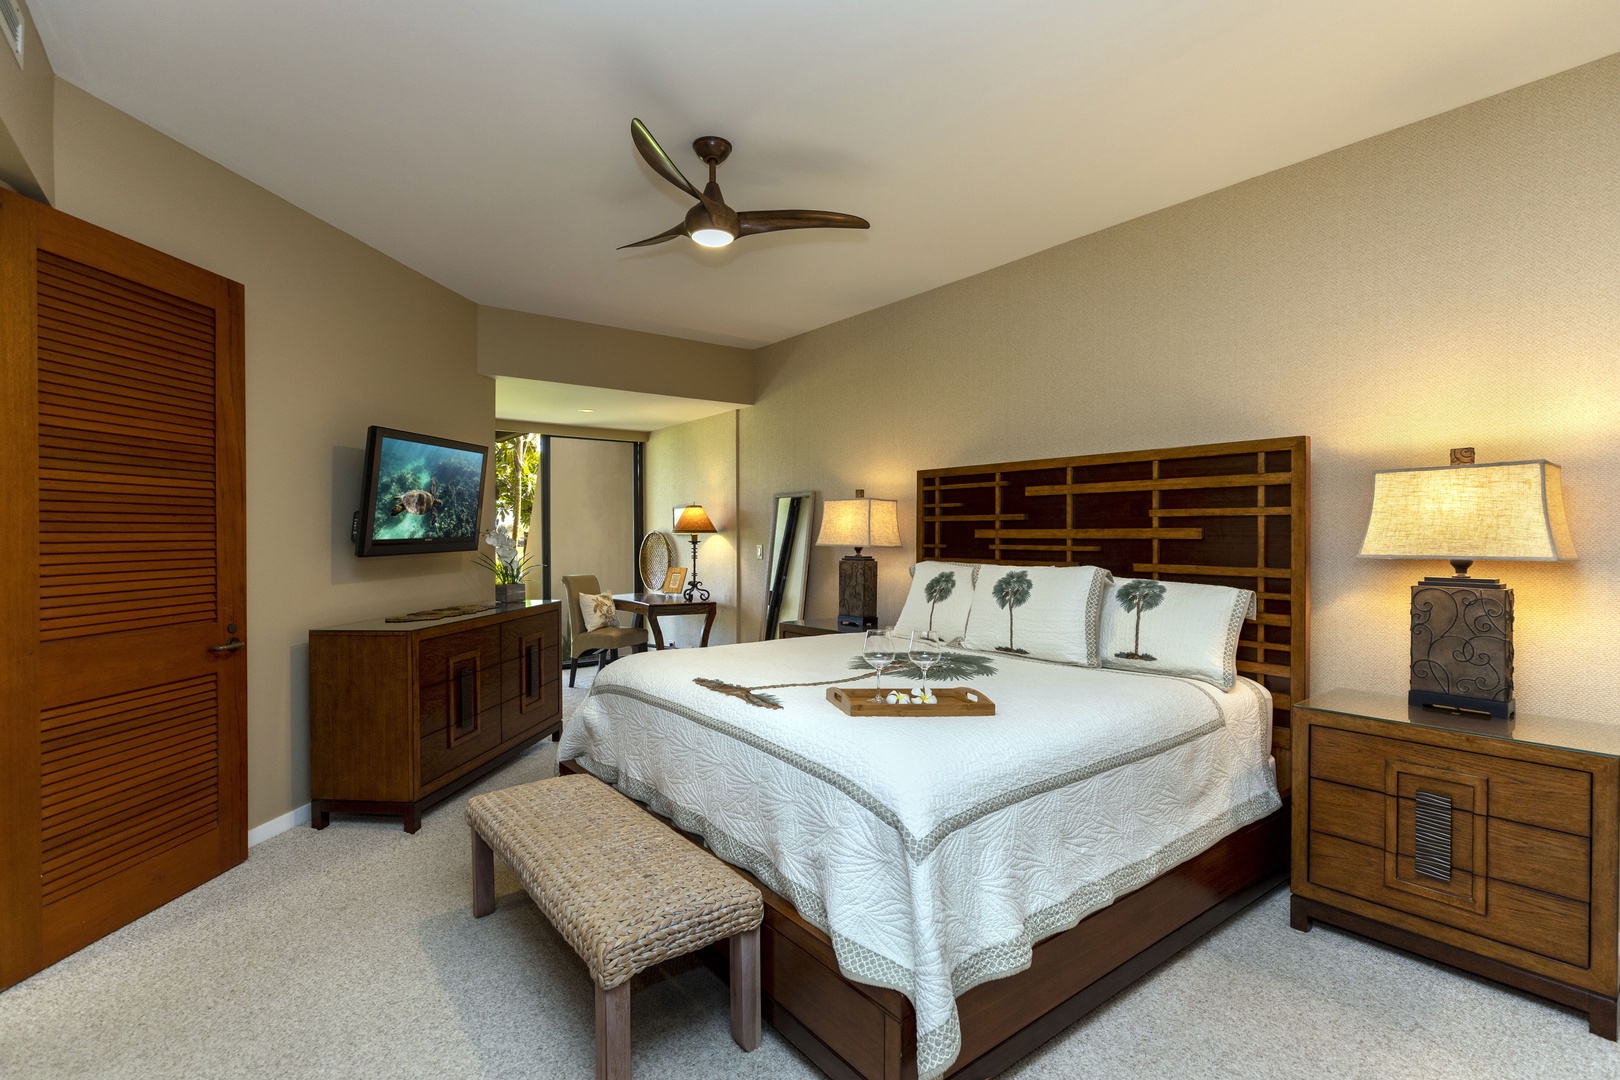 Kamuela Vacation Rentals, Mauna Lani Point E105 - The King bed is super comfy and has a door leading to the lanai.